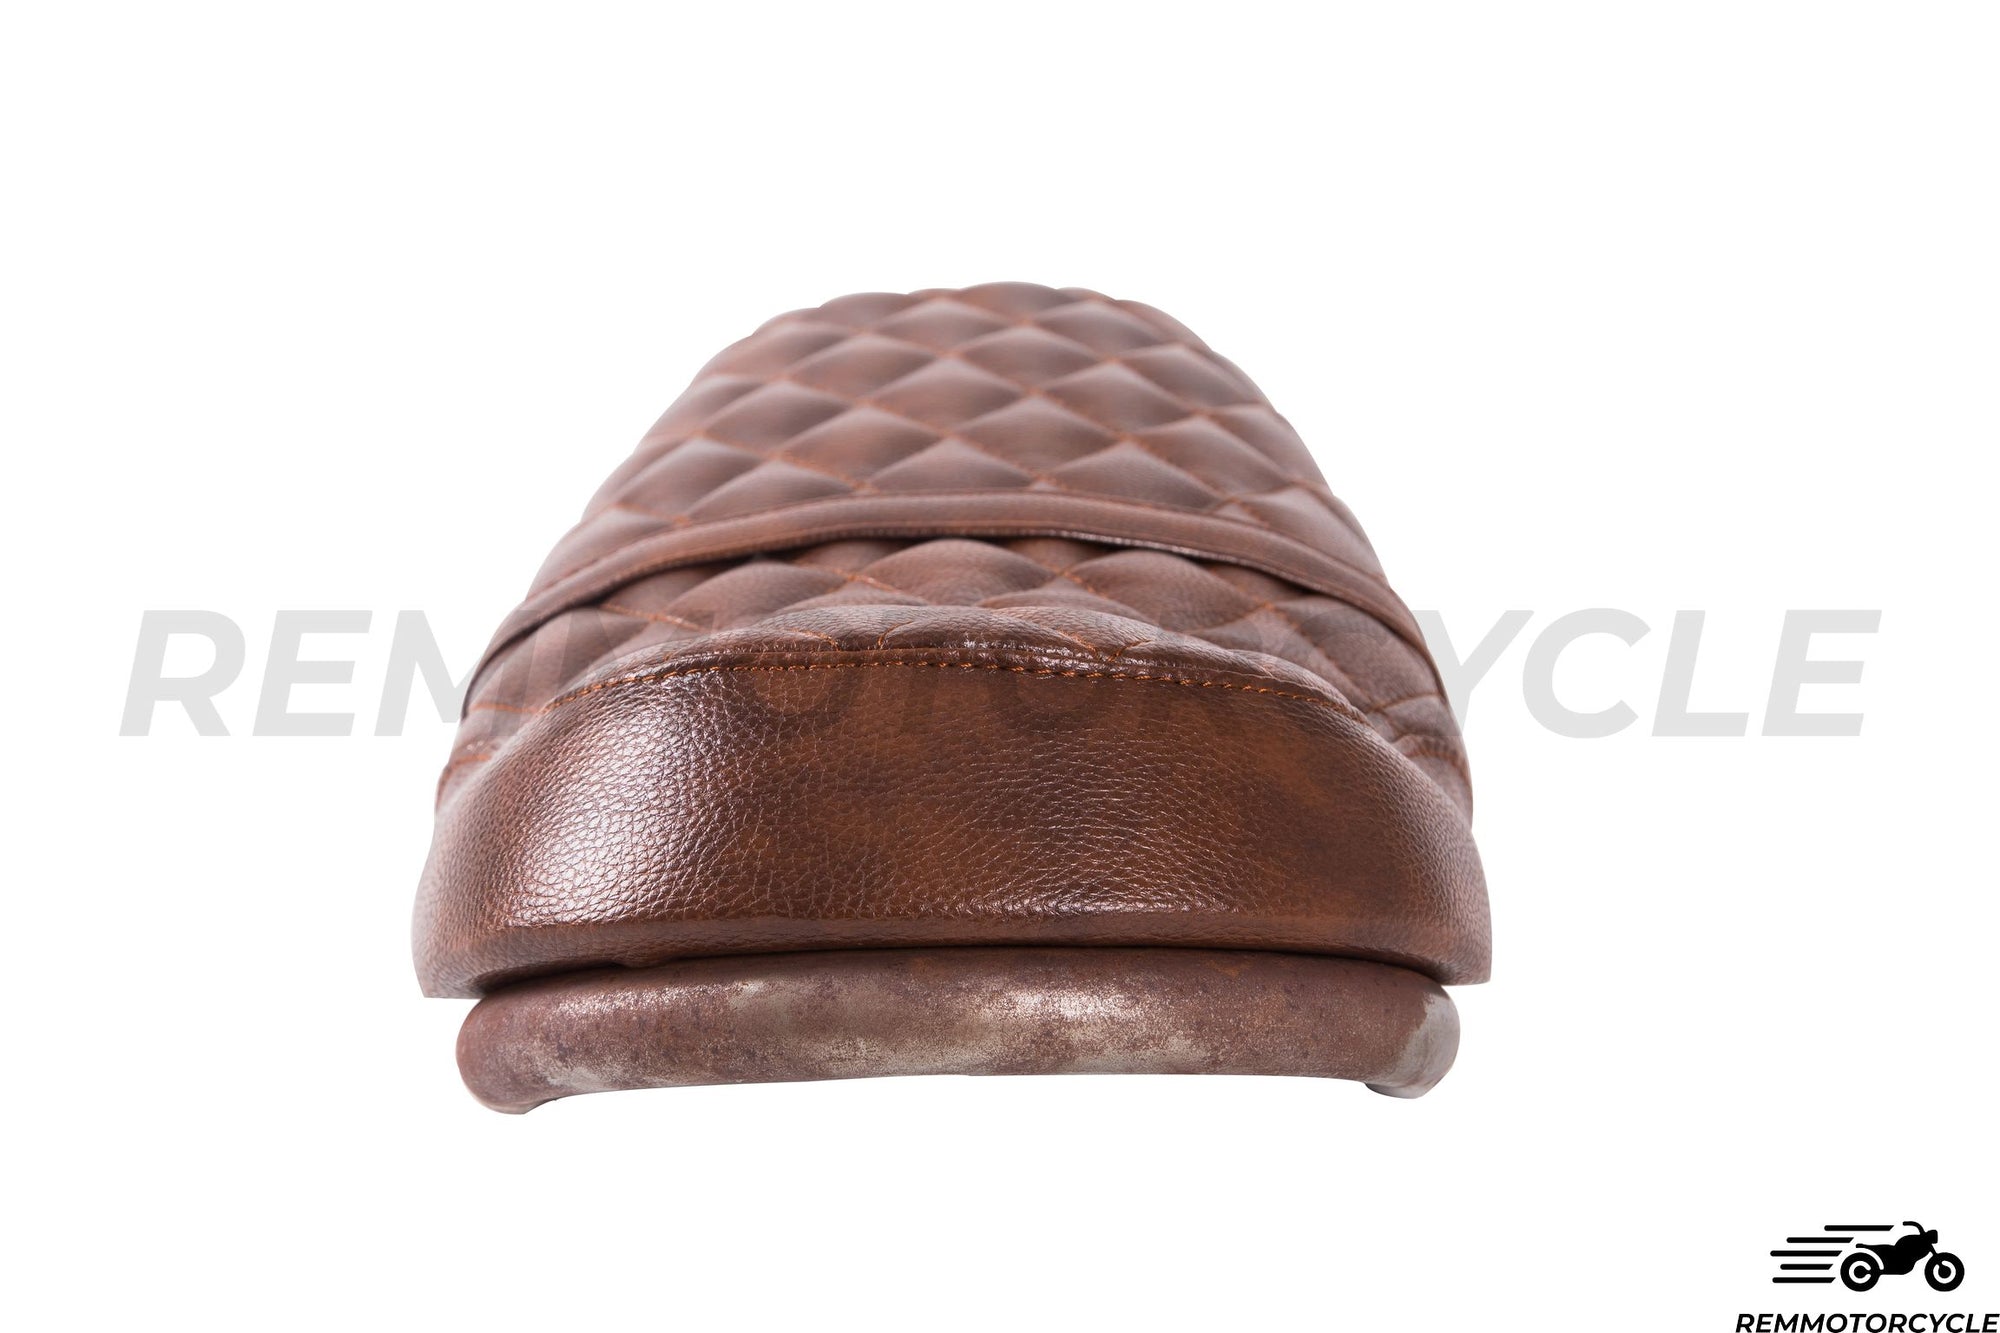 Mate Brown Saddle Type 2 Ready Diamond With Loop